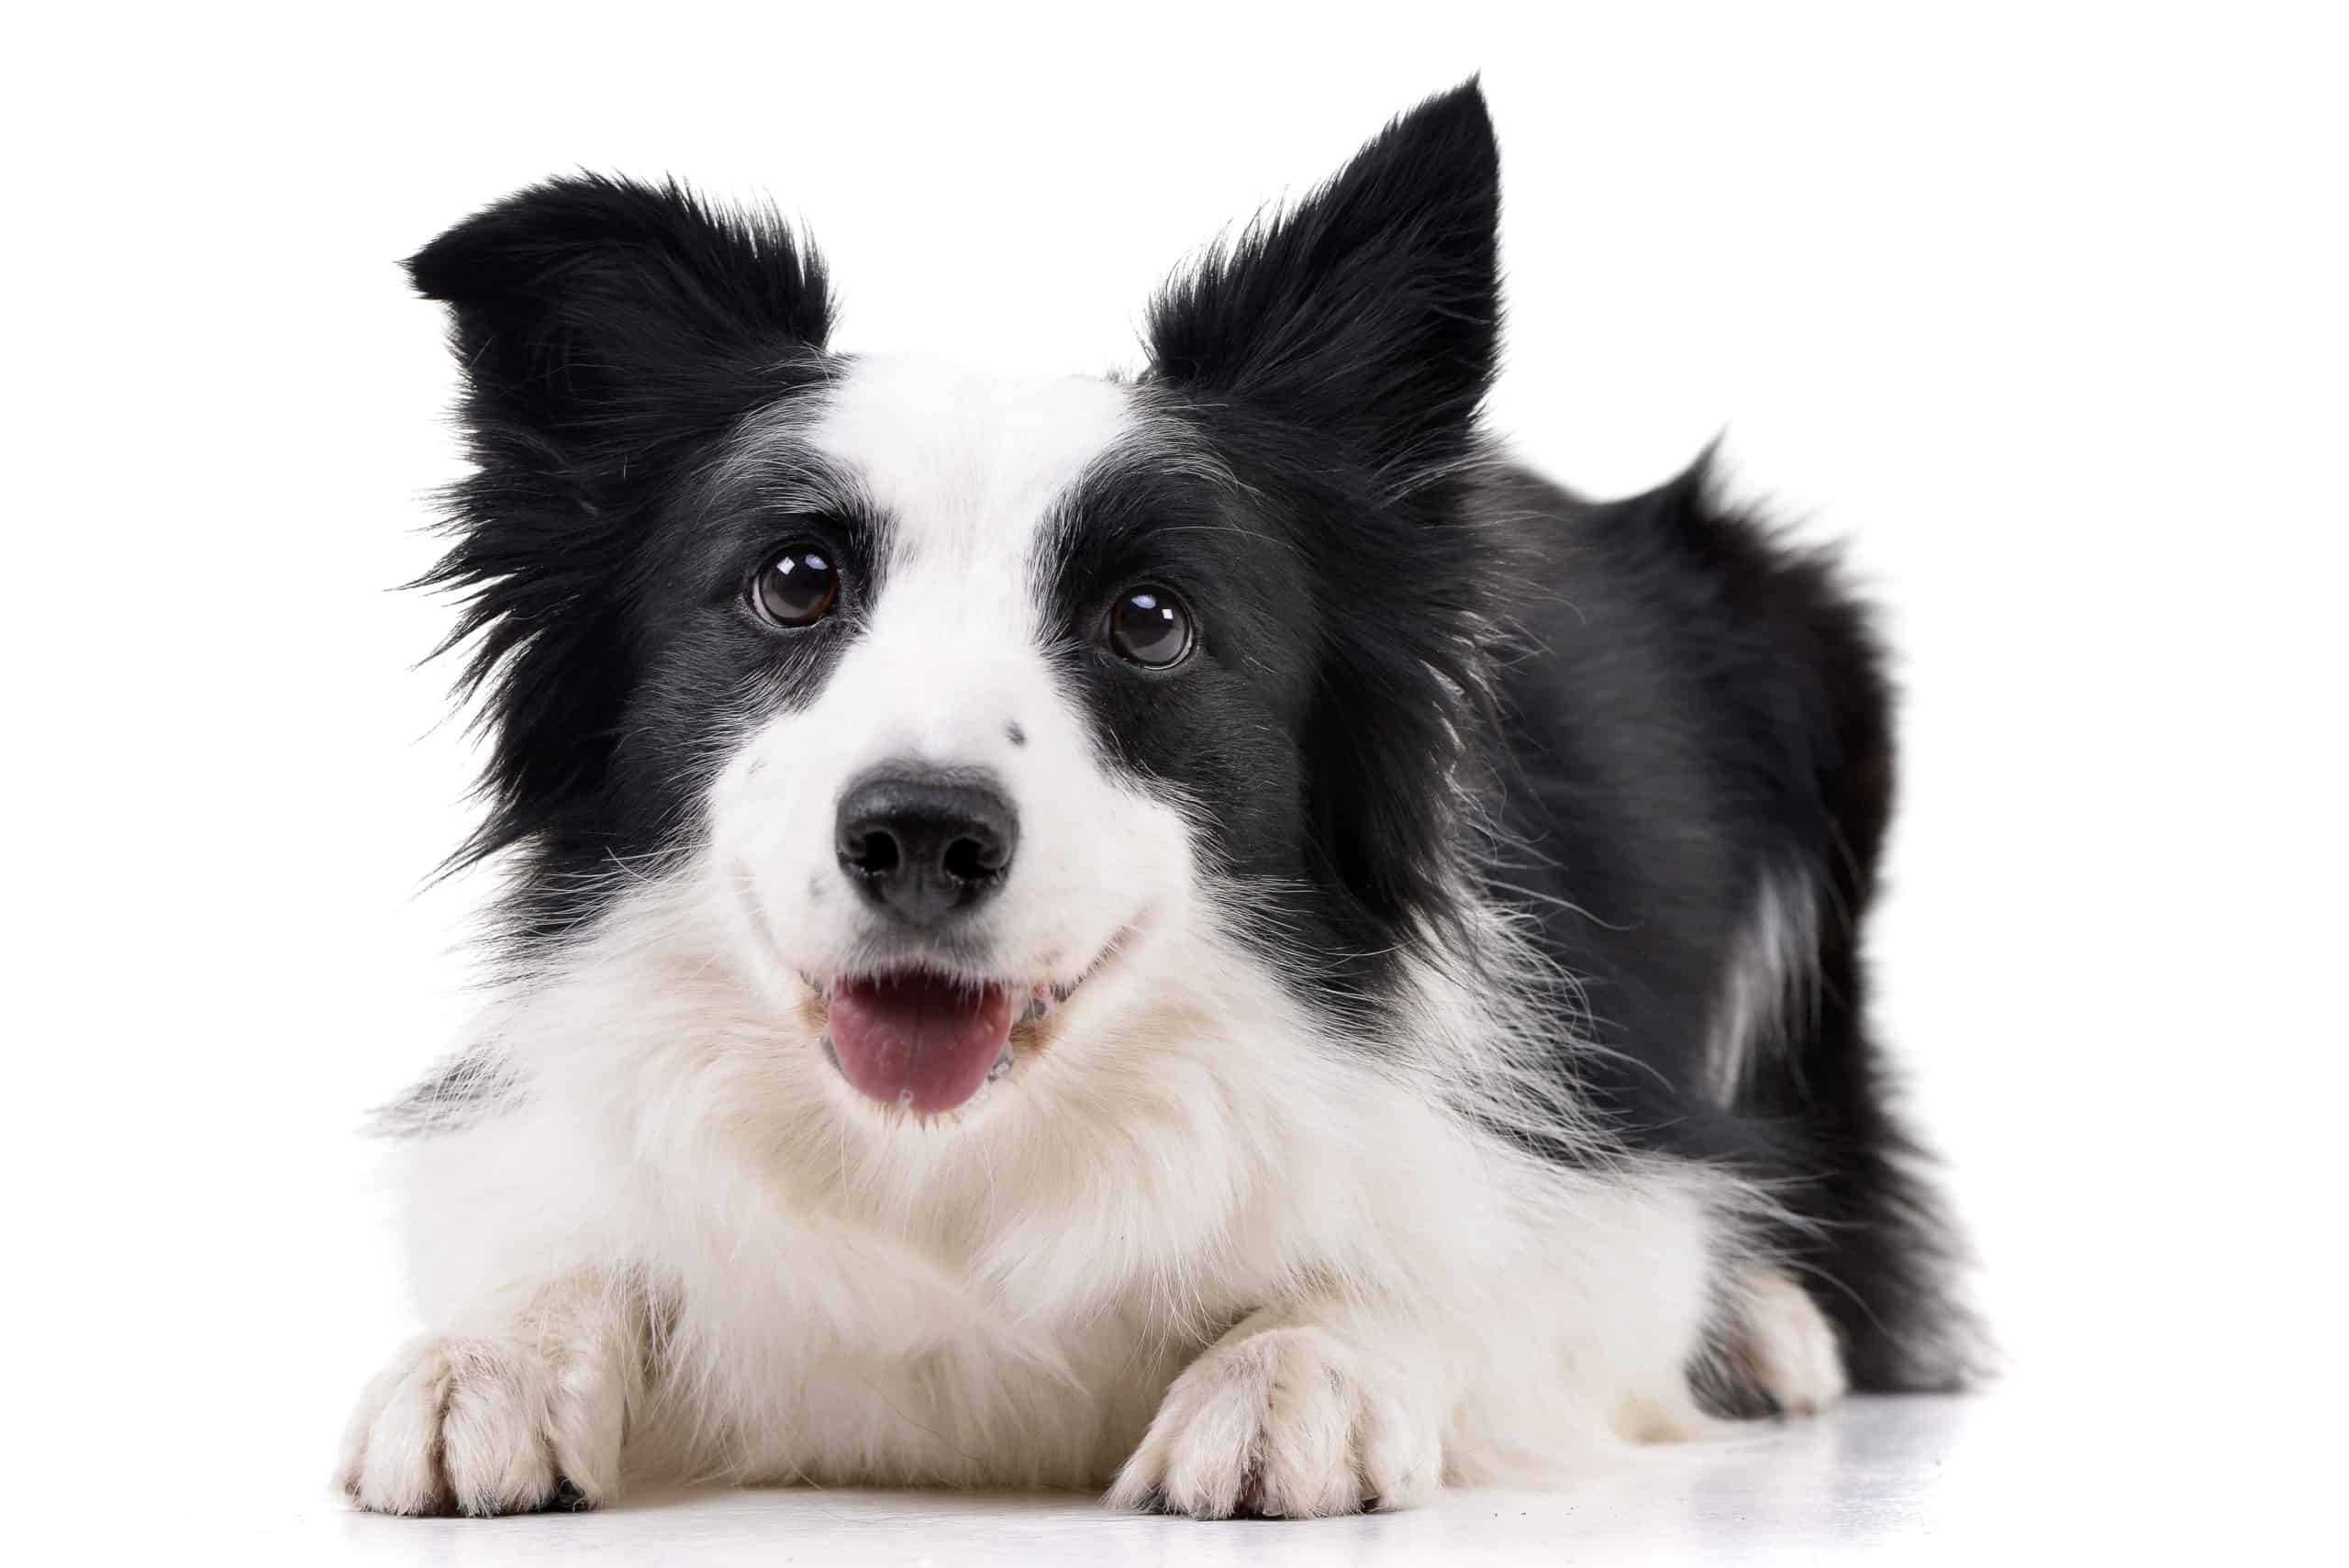 Family dog breeds include Border Collies, French Bulldogs